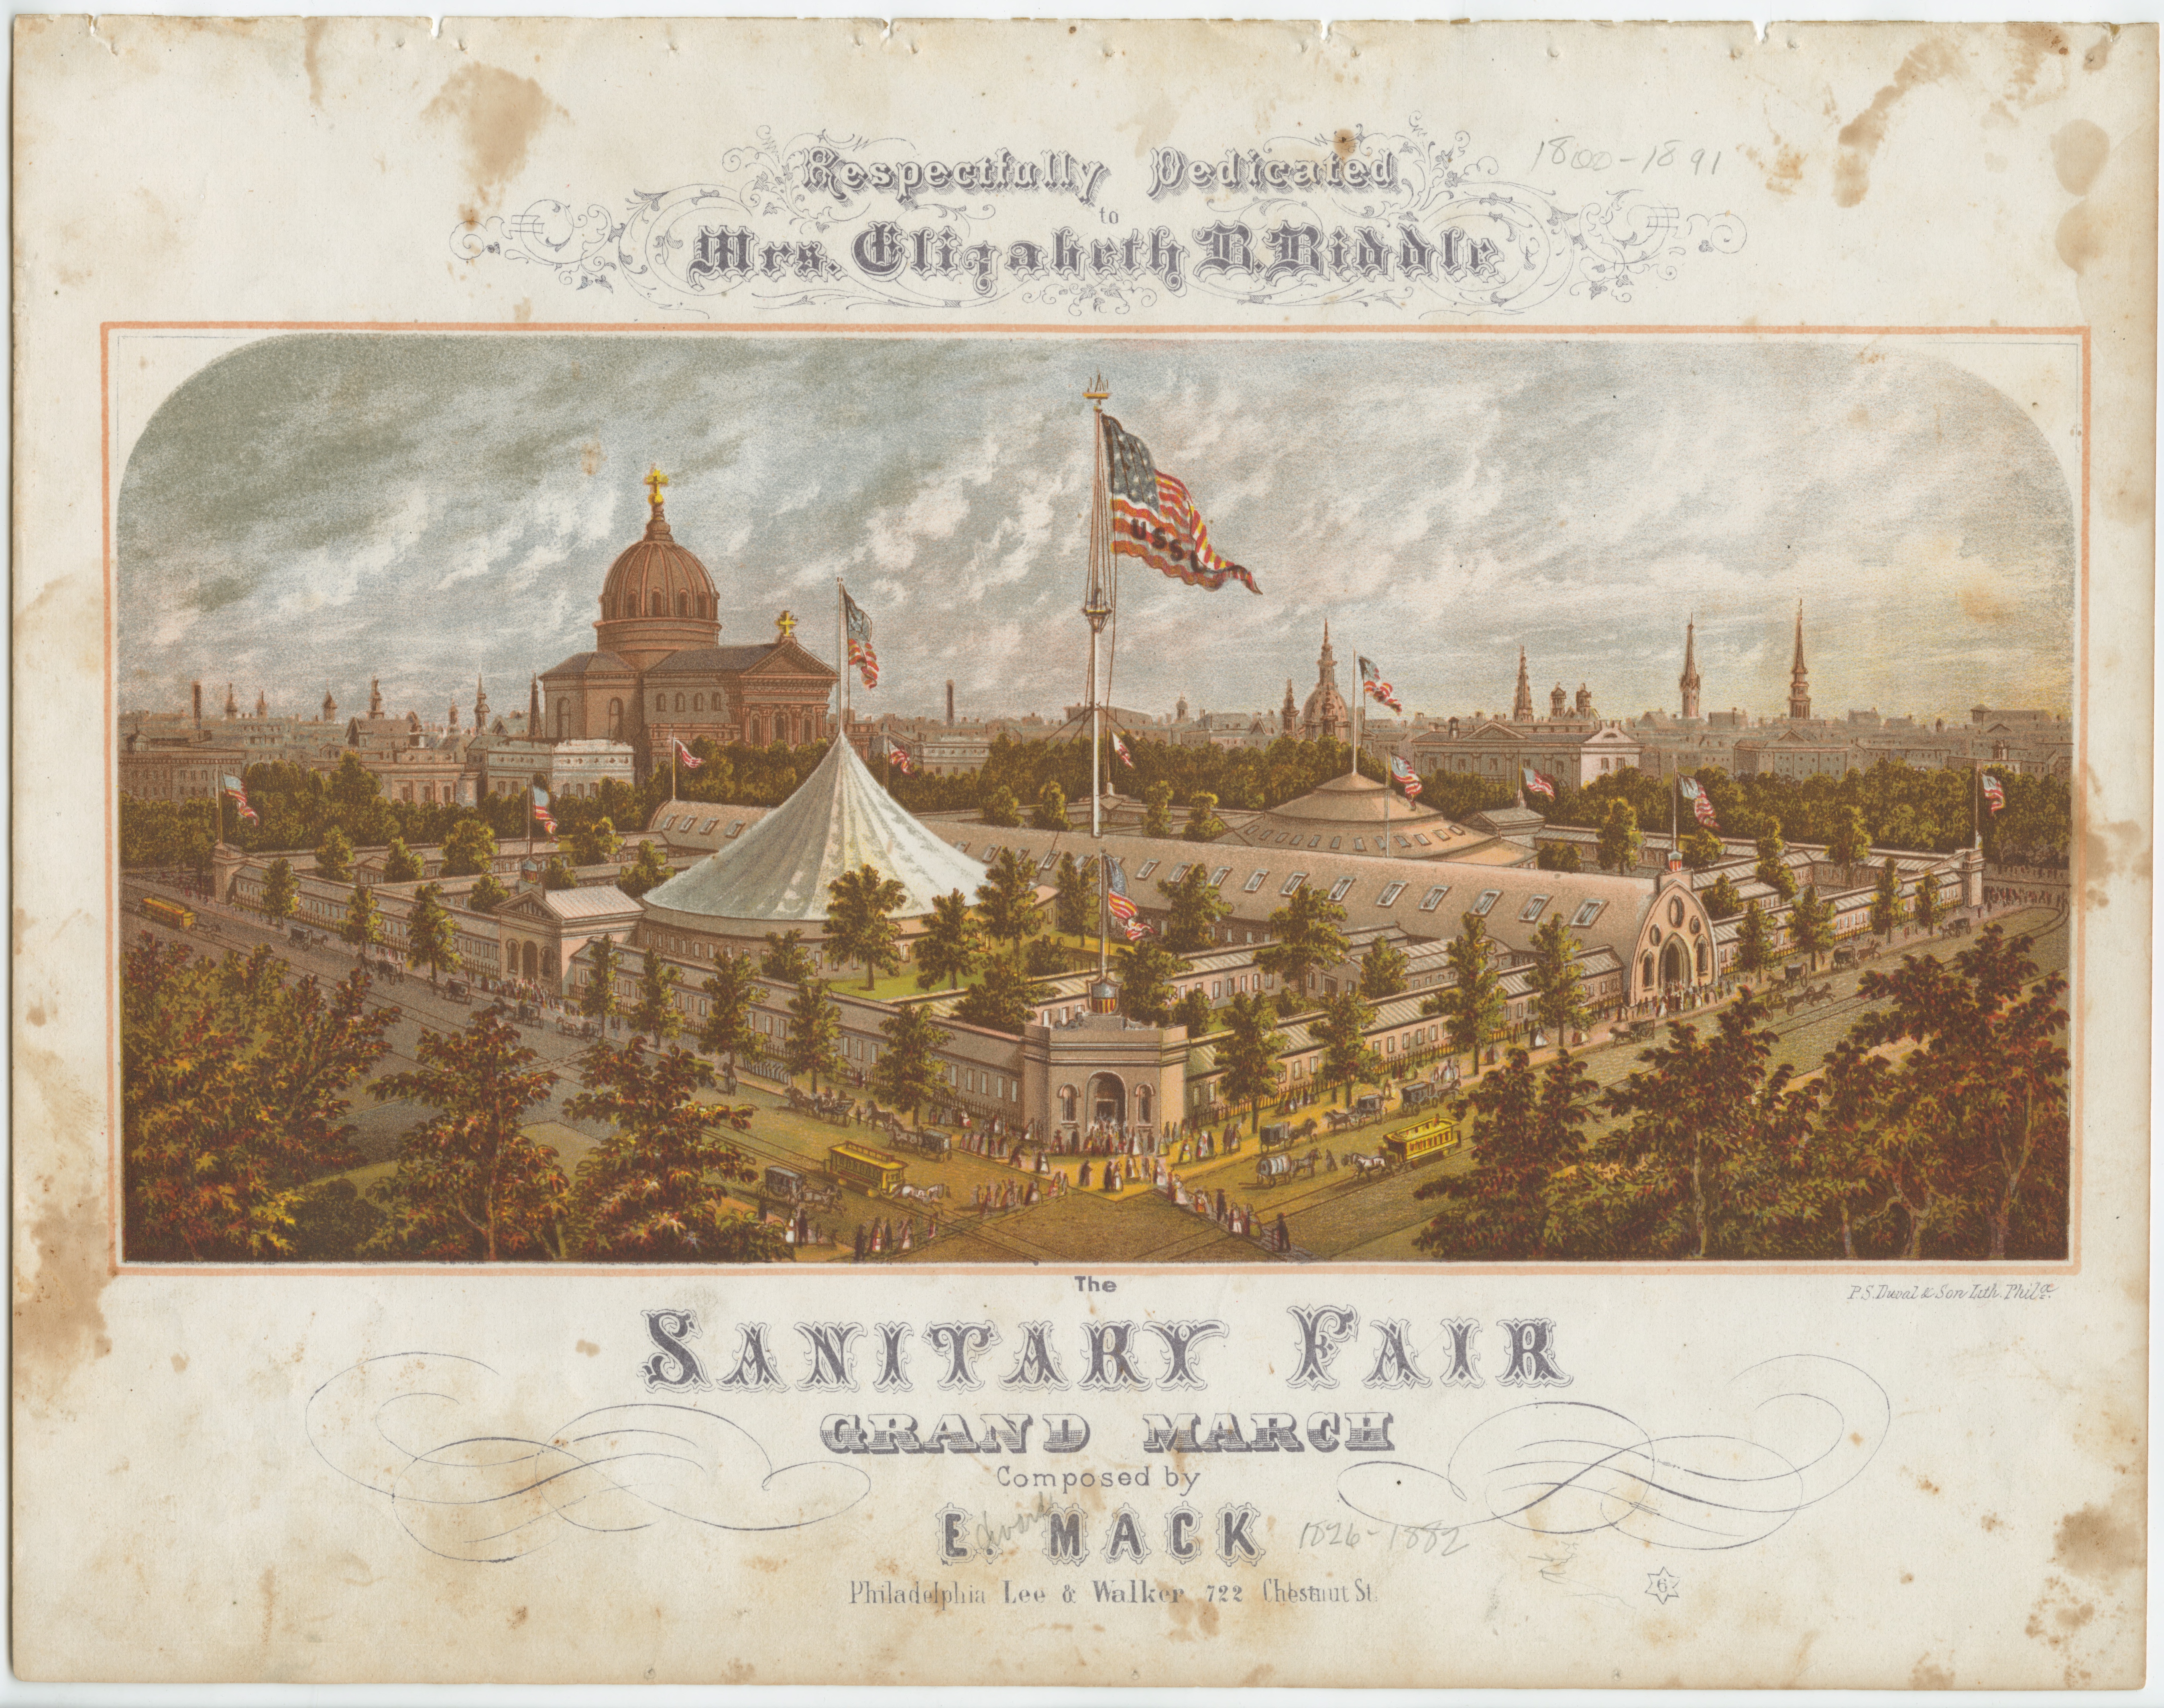 Sanitary Fair Grand March, composed by E. Mack. Shows the fair grounds, with many intersecting long halls, segmented by columned entrances. Two large round peaked roofs rise from within the complex. A domed cathedral and other steeples and buildings rise behind the fair. Many large U.S. flags fly over the grounds. 